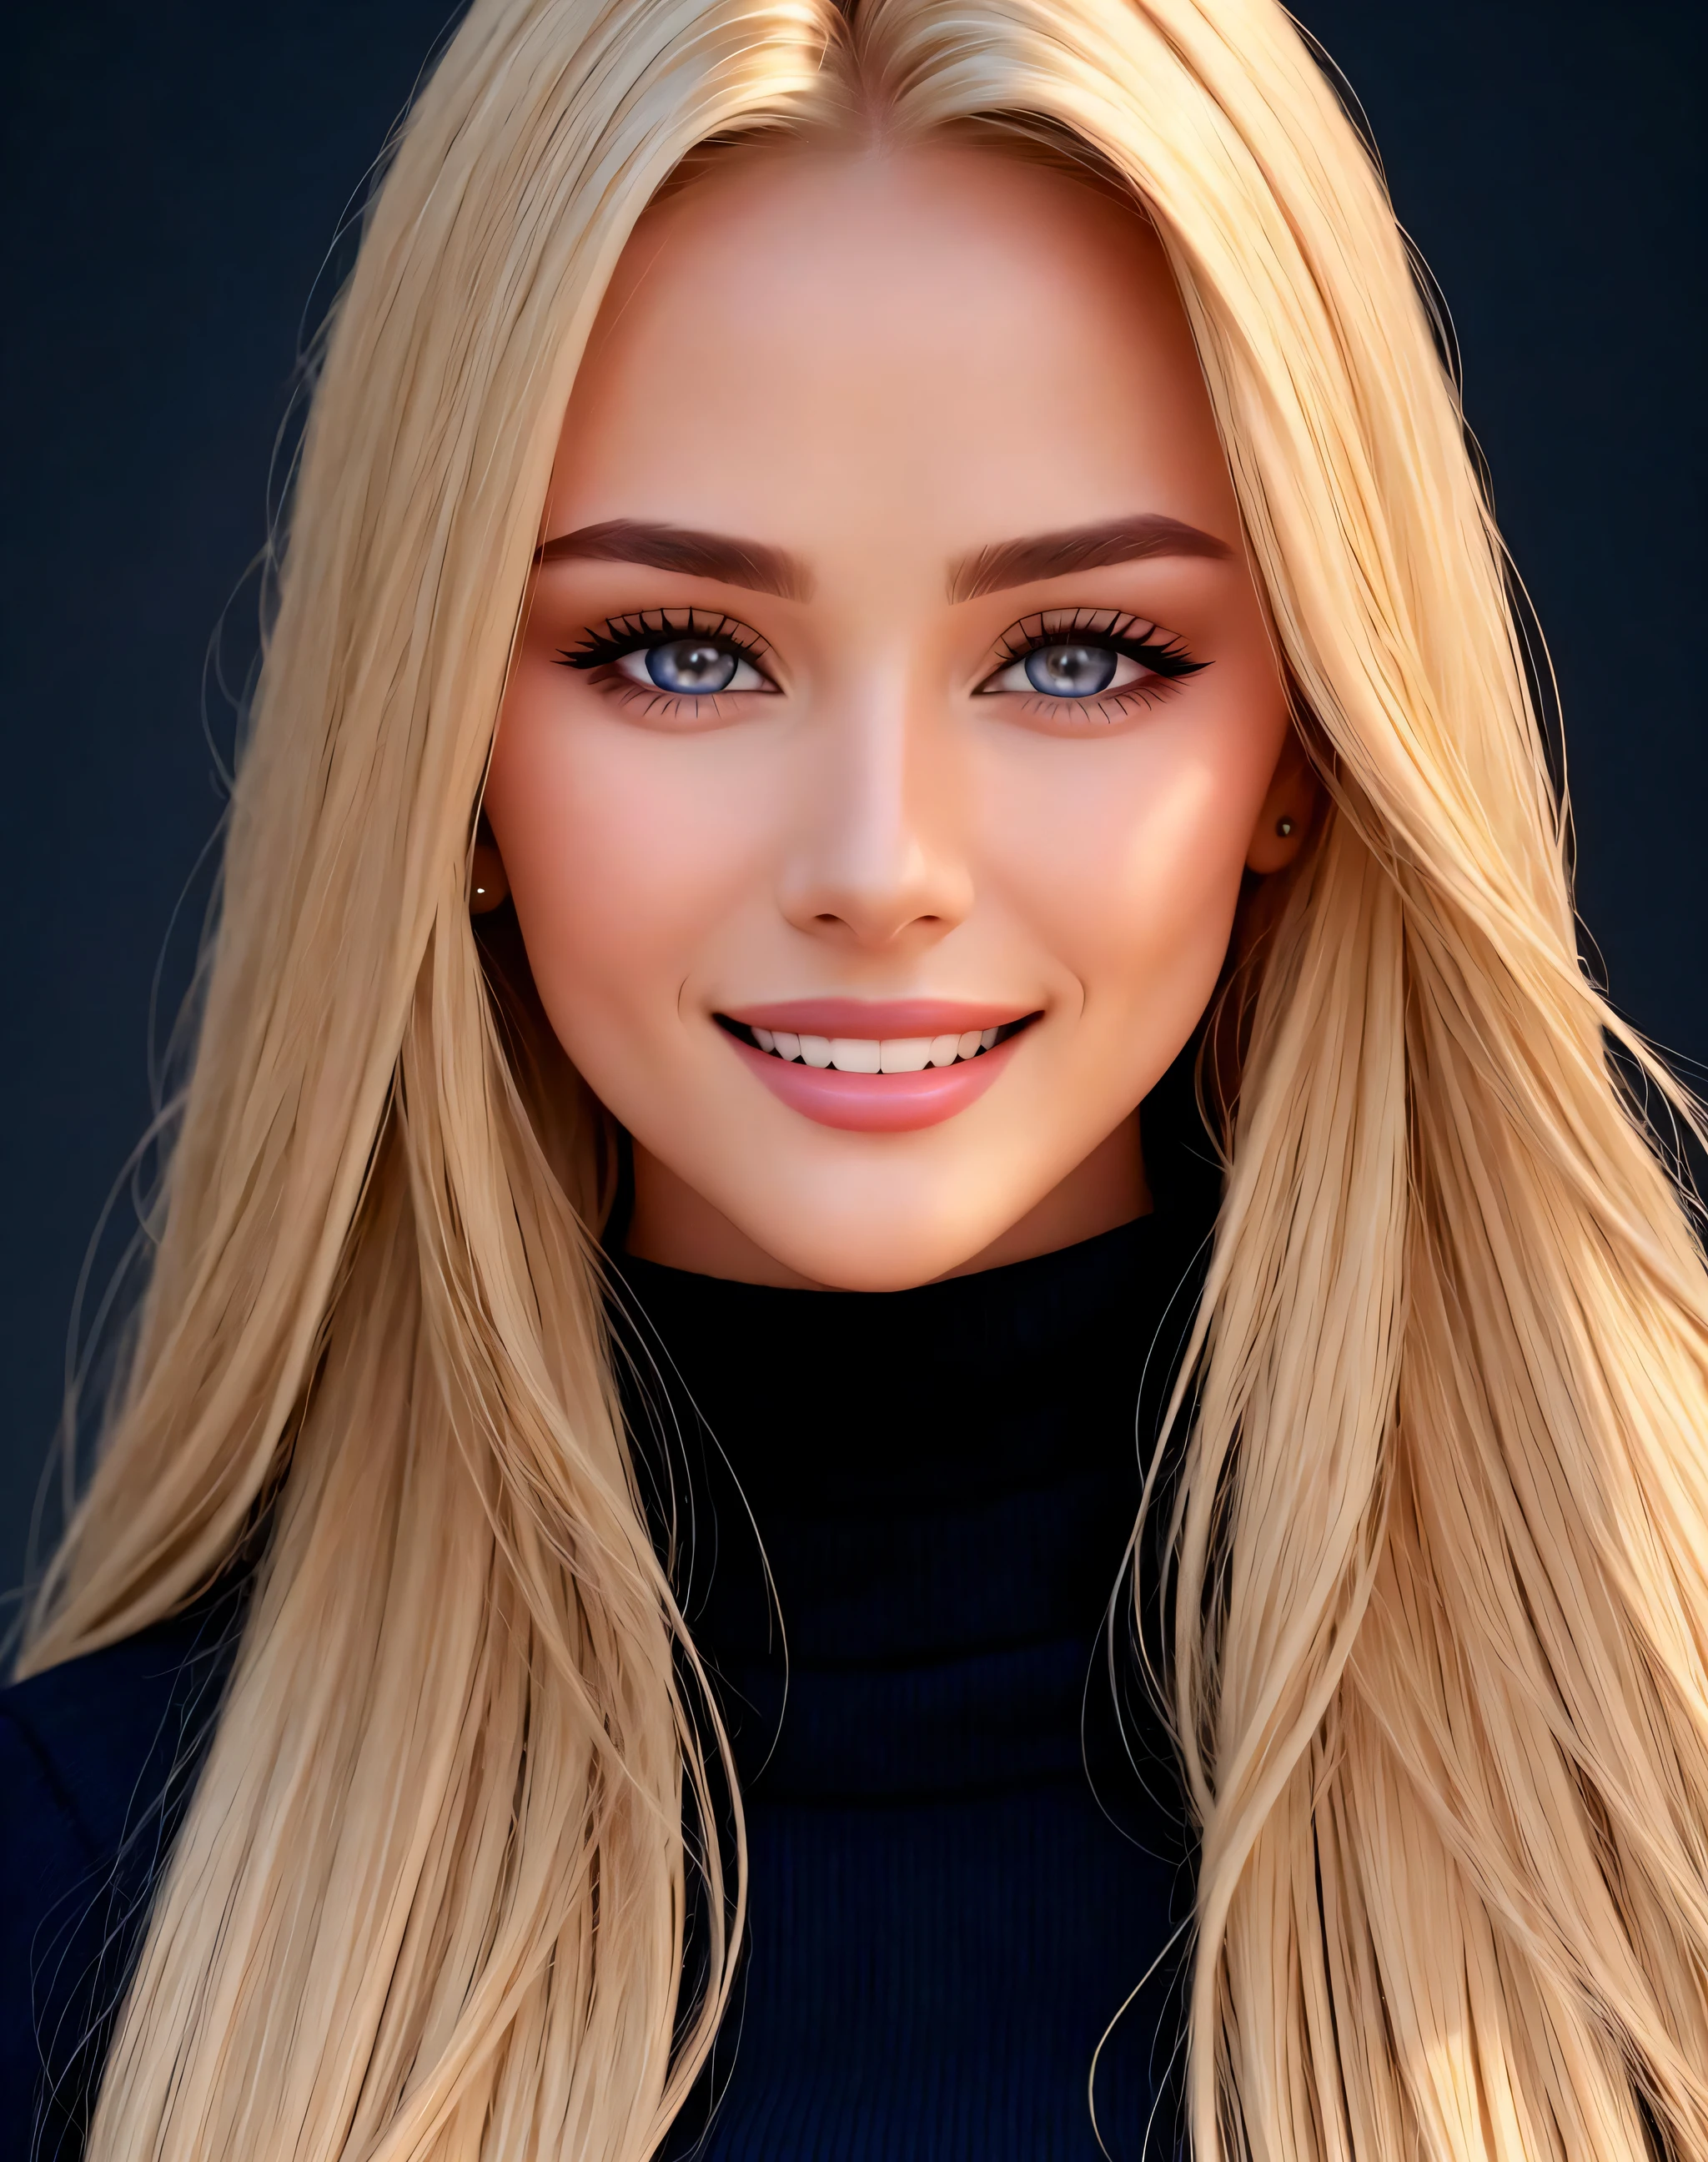 chef-d&#39;œuvre, absurdes,hdr ,highly detailed eyes and affronter,souriant, beau clin d&#39;œil_femme, a femme with long blonde hair and a black sweater ,clin d&#39;œil parfait_corps,clin d&#39;œil parfait_affronter,